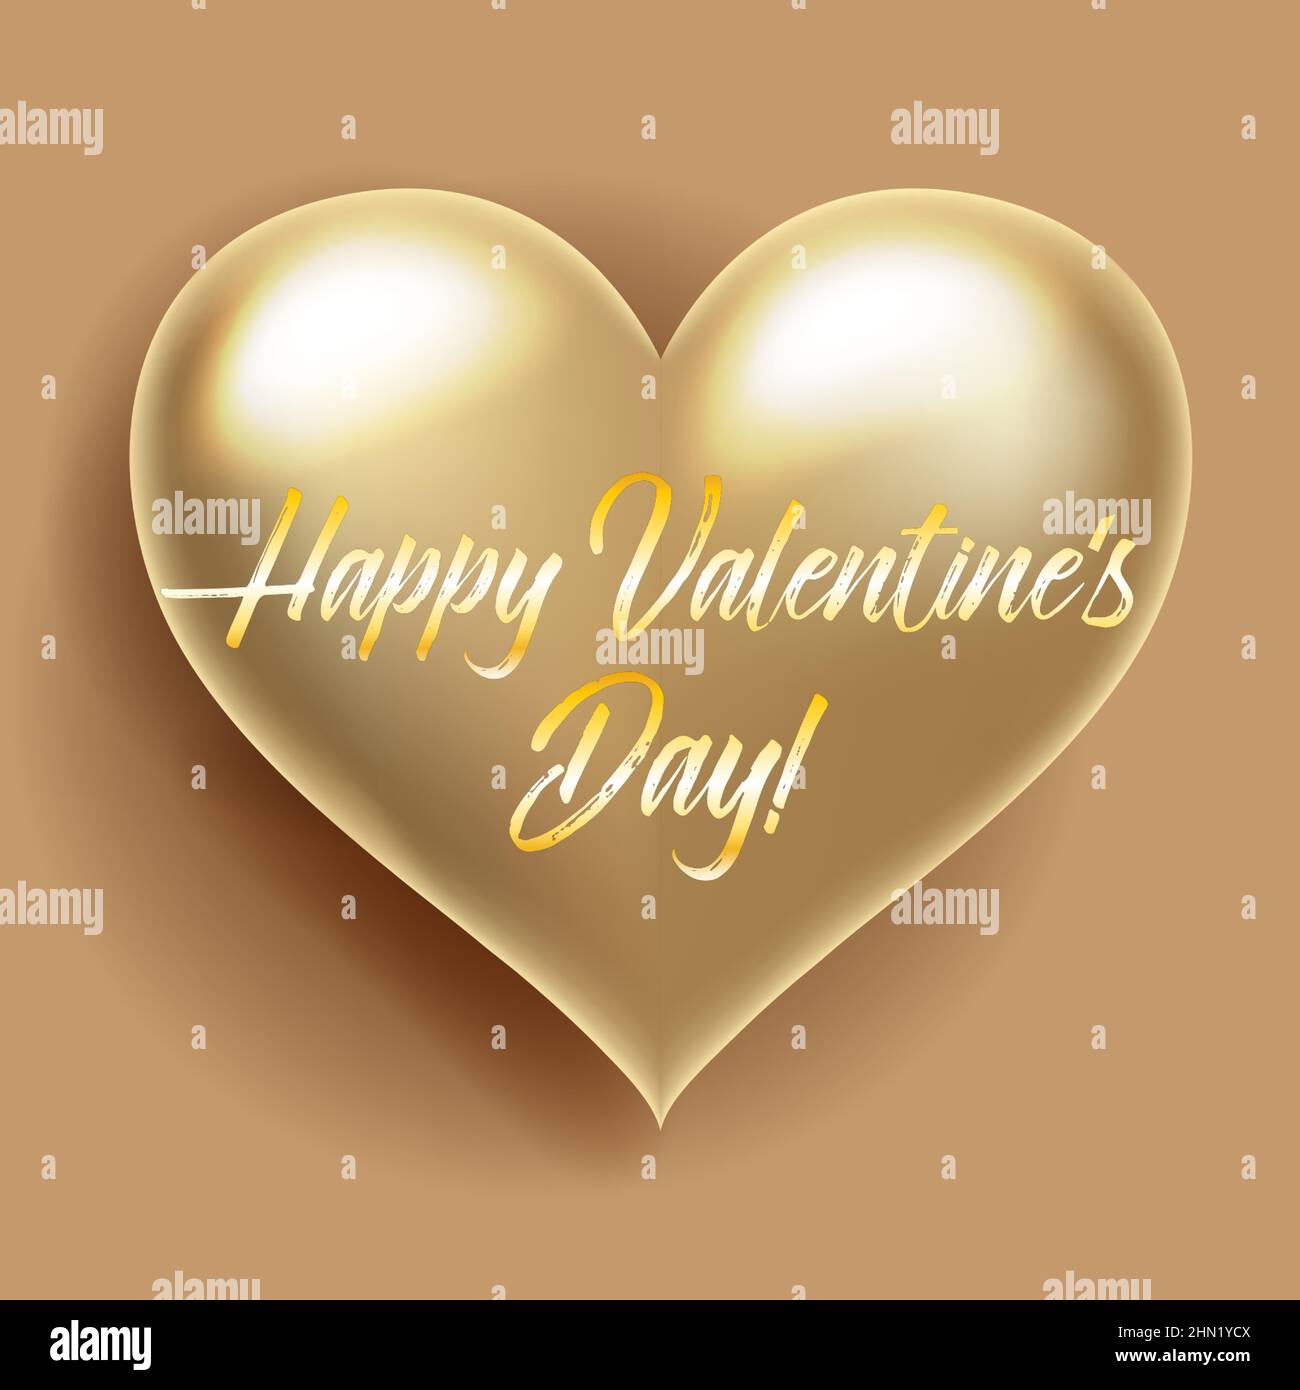 Happy Valentines Day card. Gold glossy 3D heart shape isolated symbol of love, an element for decorating holidays, wedding invitations, and greetings Stock Vector